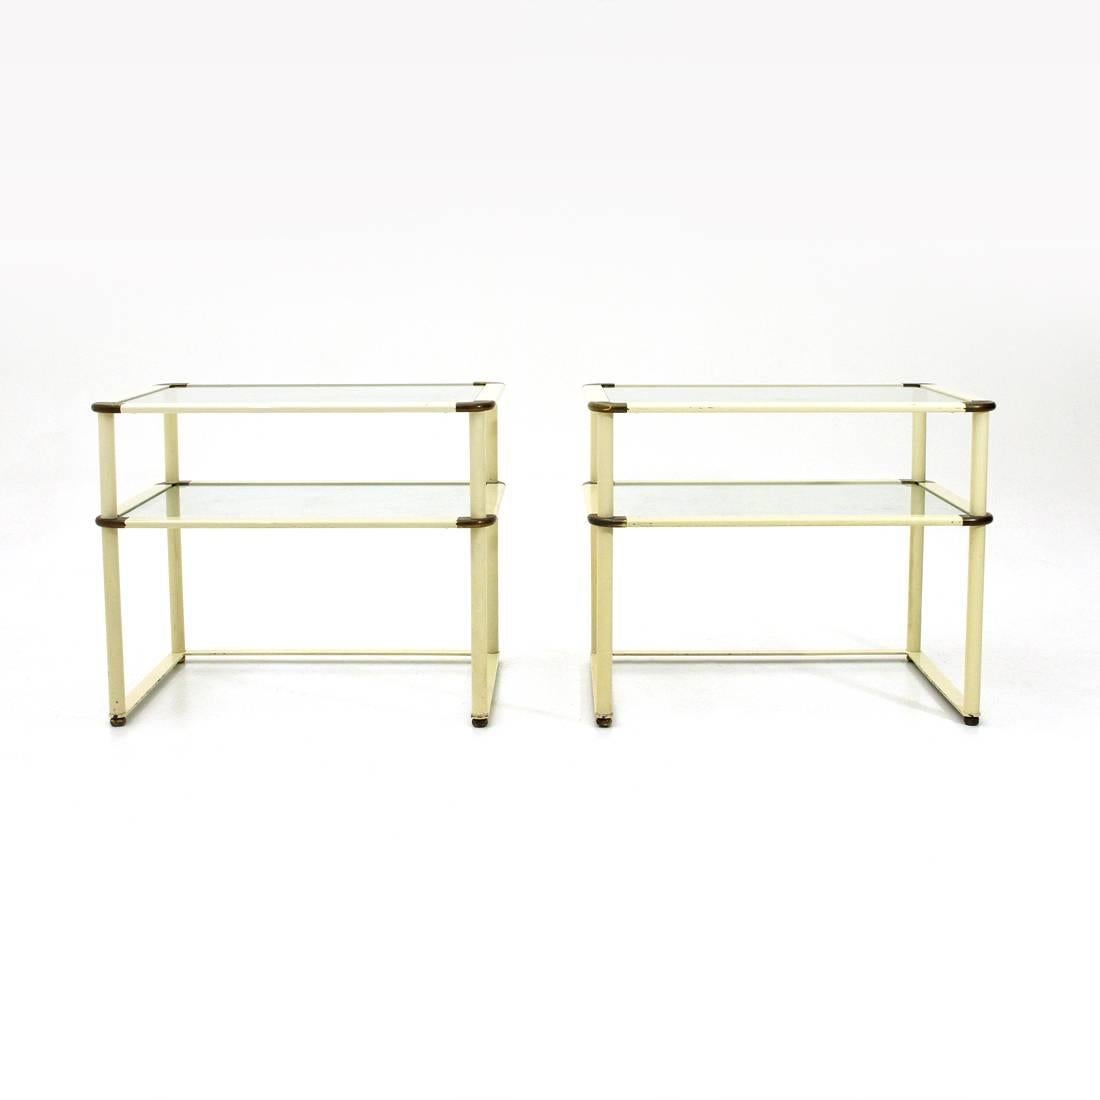 Italian Brass and Glass Bed Side Table, 1970s, Set of Two